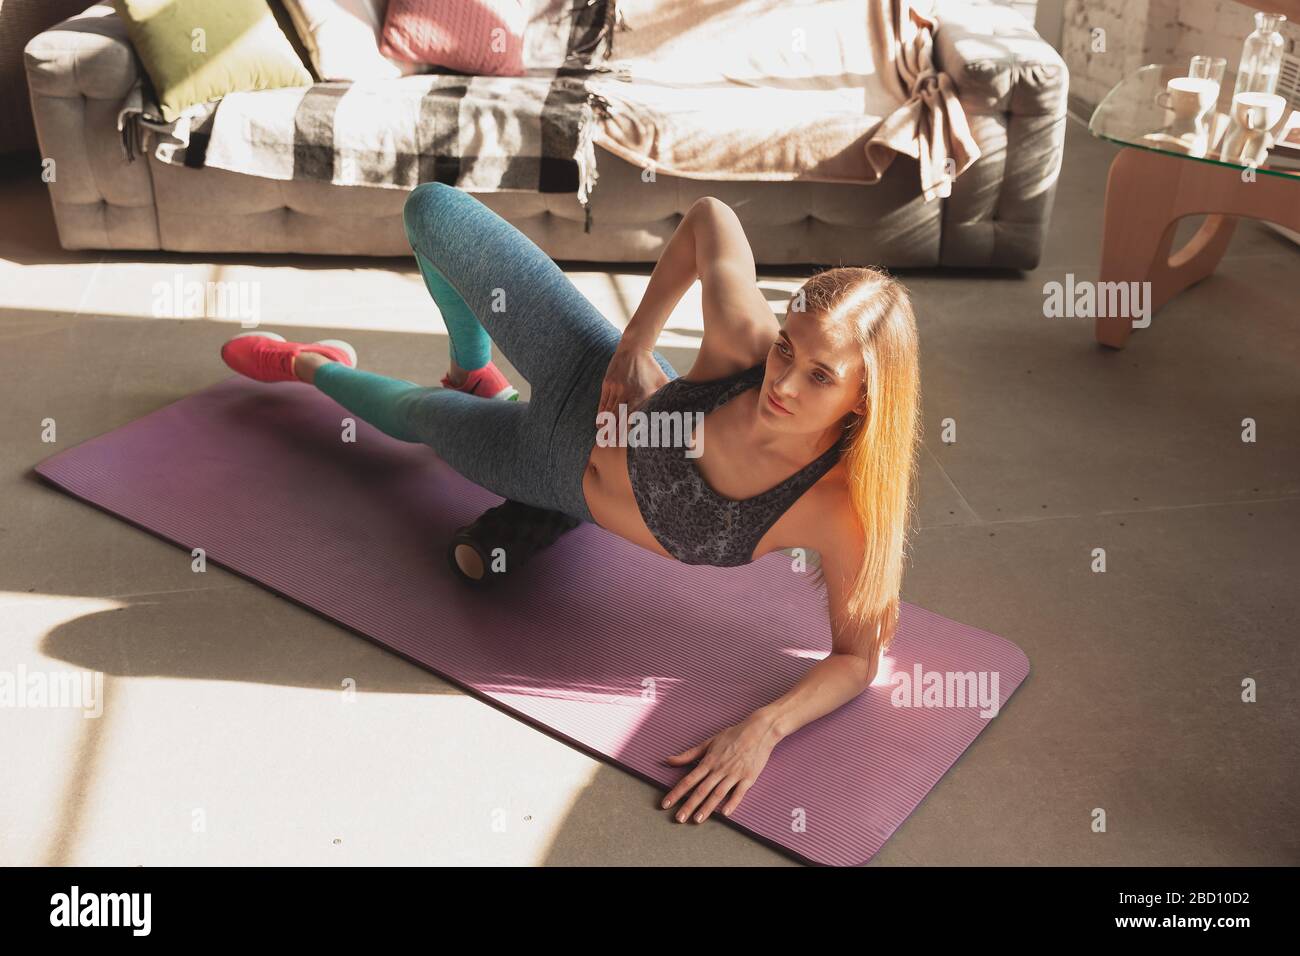 Young woman teaching at home online courses of fitness, aerobic, sporty lifestyle while quarantine. Getting active while isolated, wellness, movement concept. Exercises with roller, balance. Stock Photo